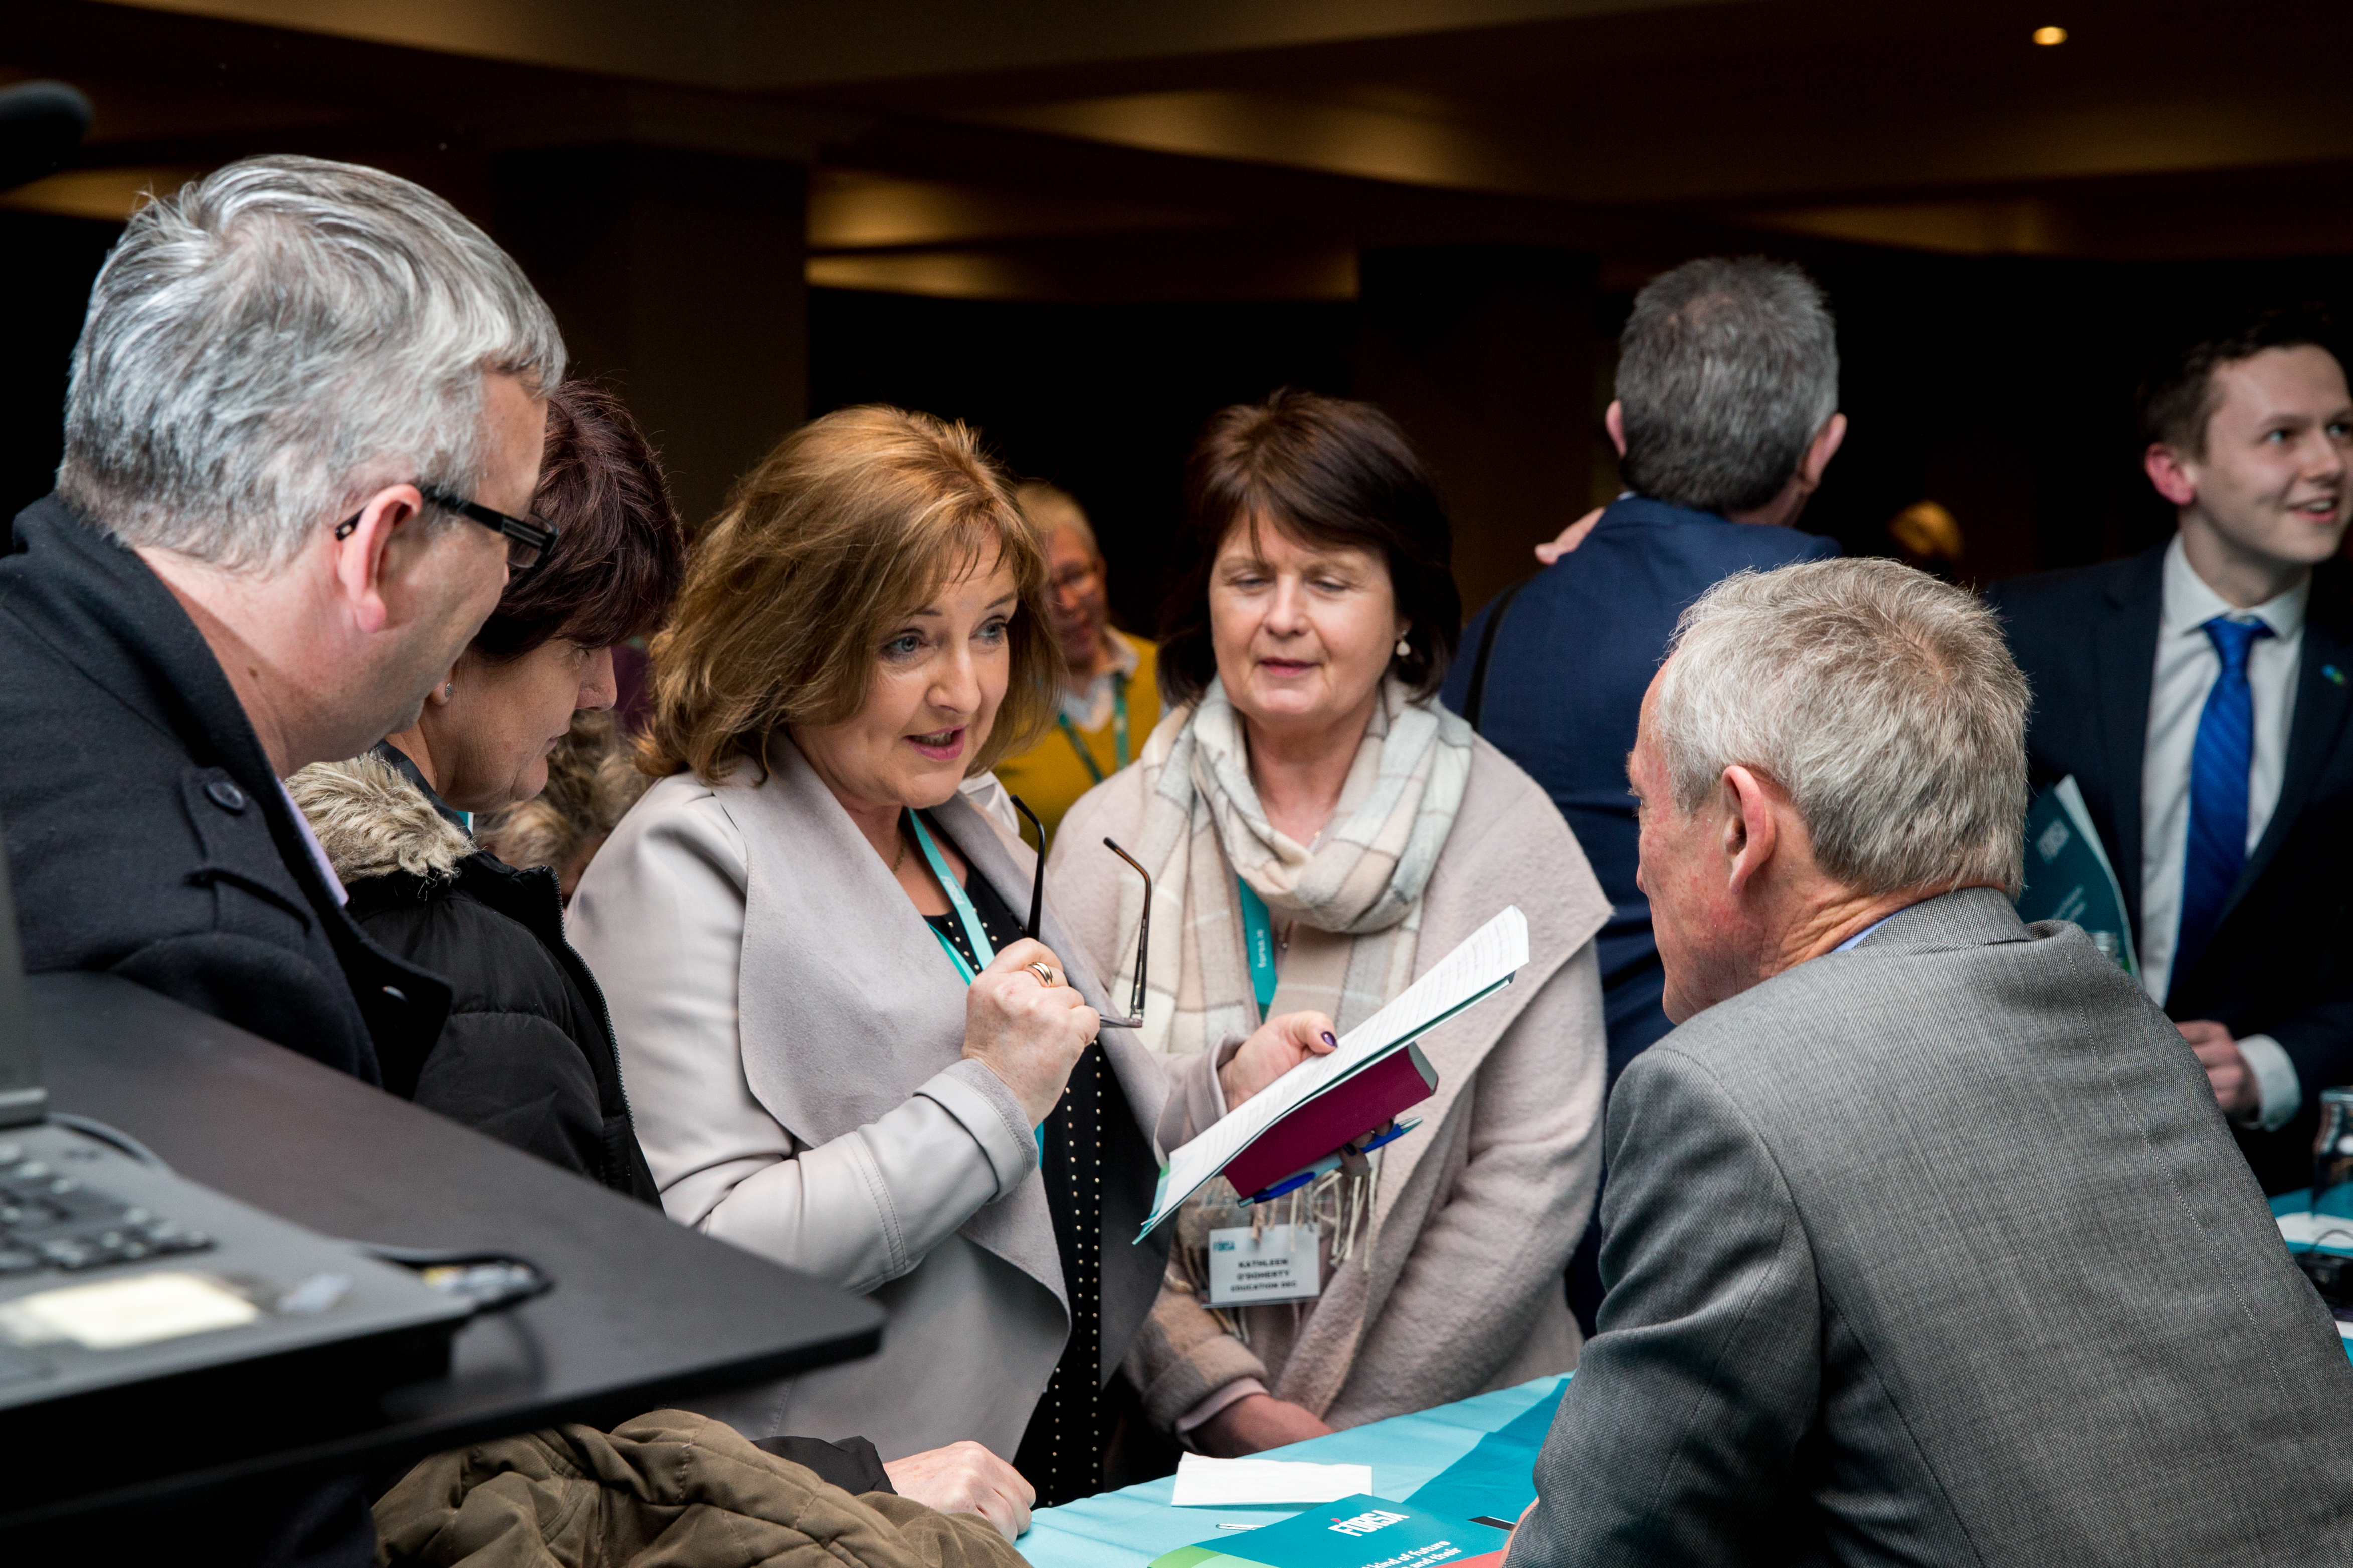 Delegates speaking with Minister Bruton at last year's Education seminar.